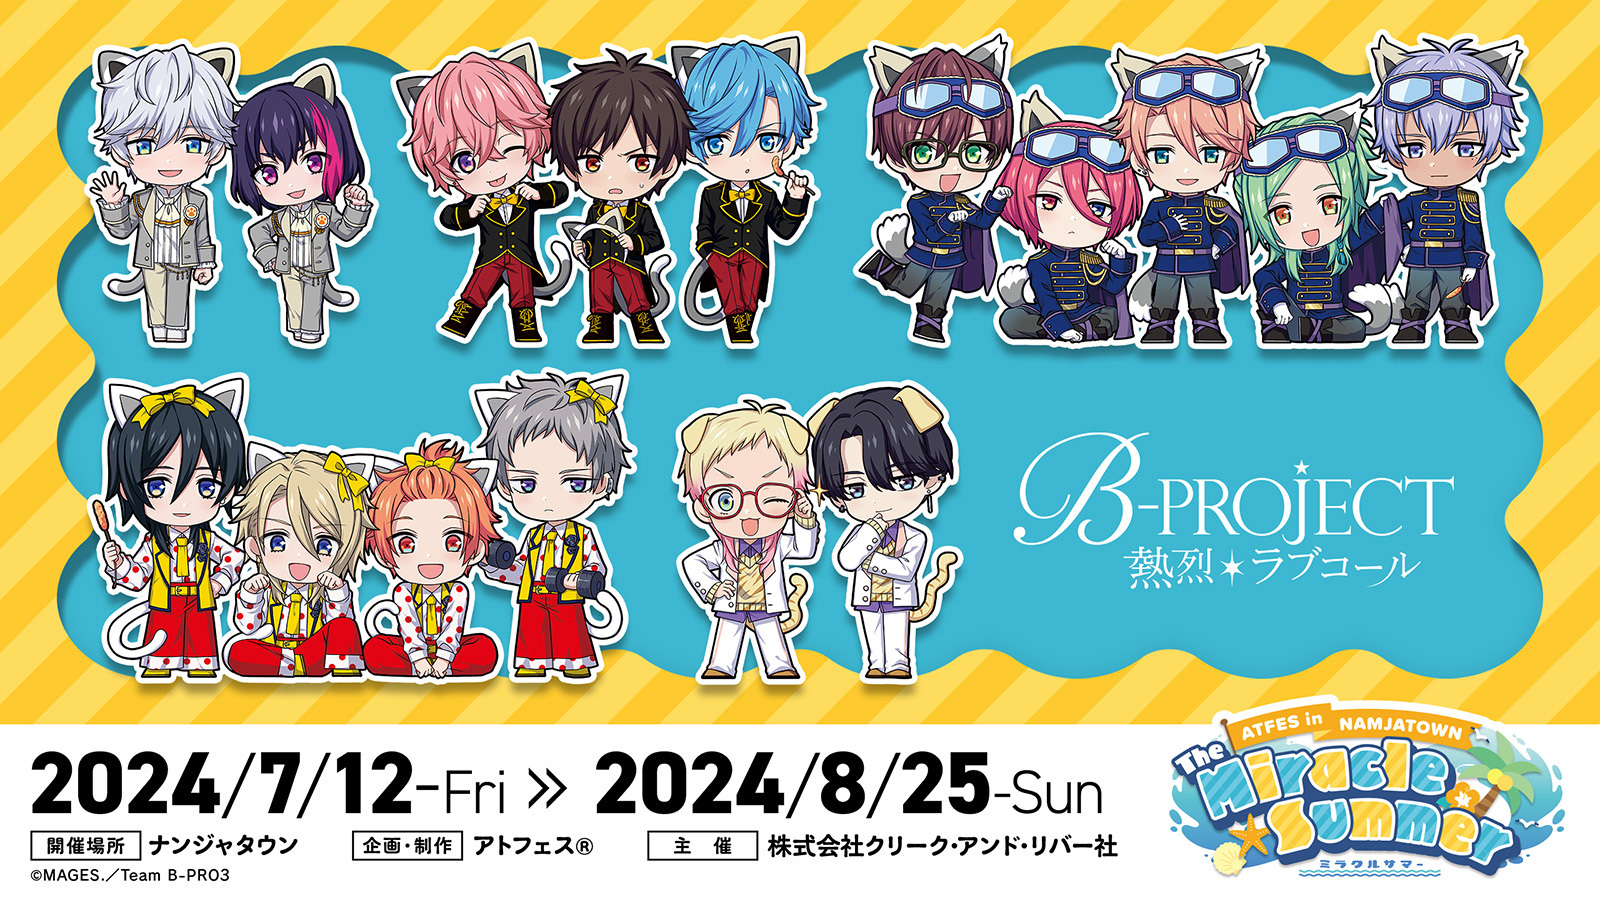 ATFES in NAMJATOWN The Miracle Summer『B-PROJECT ～熱烈＊ラブコール～』ミニキャラ